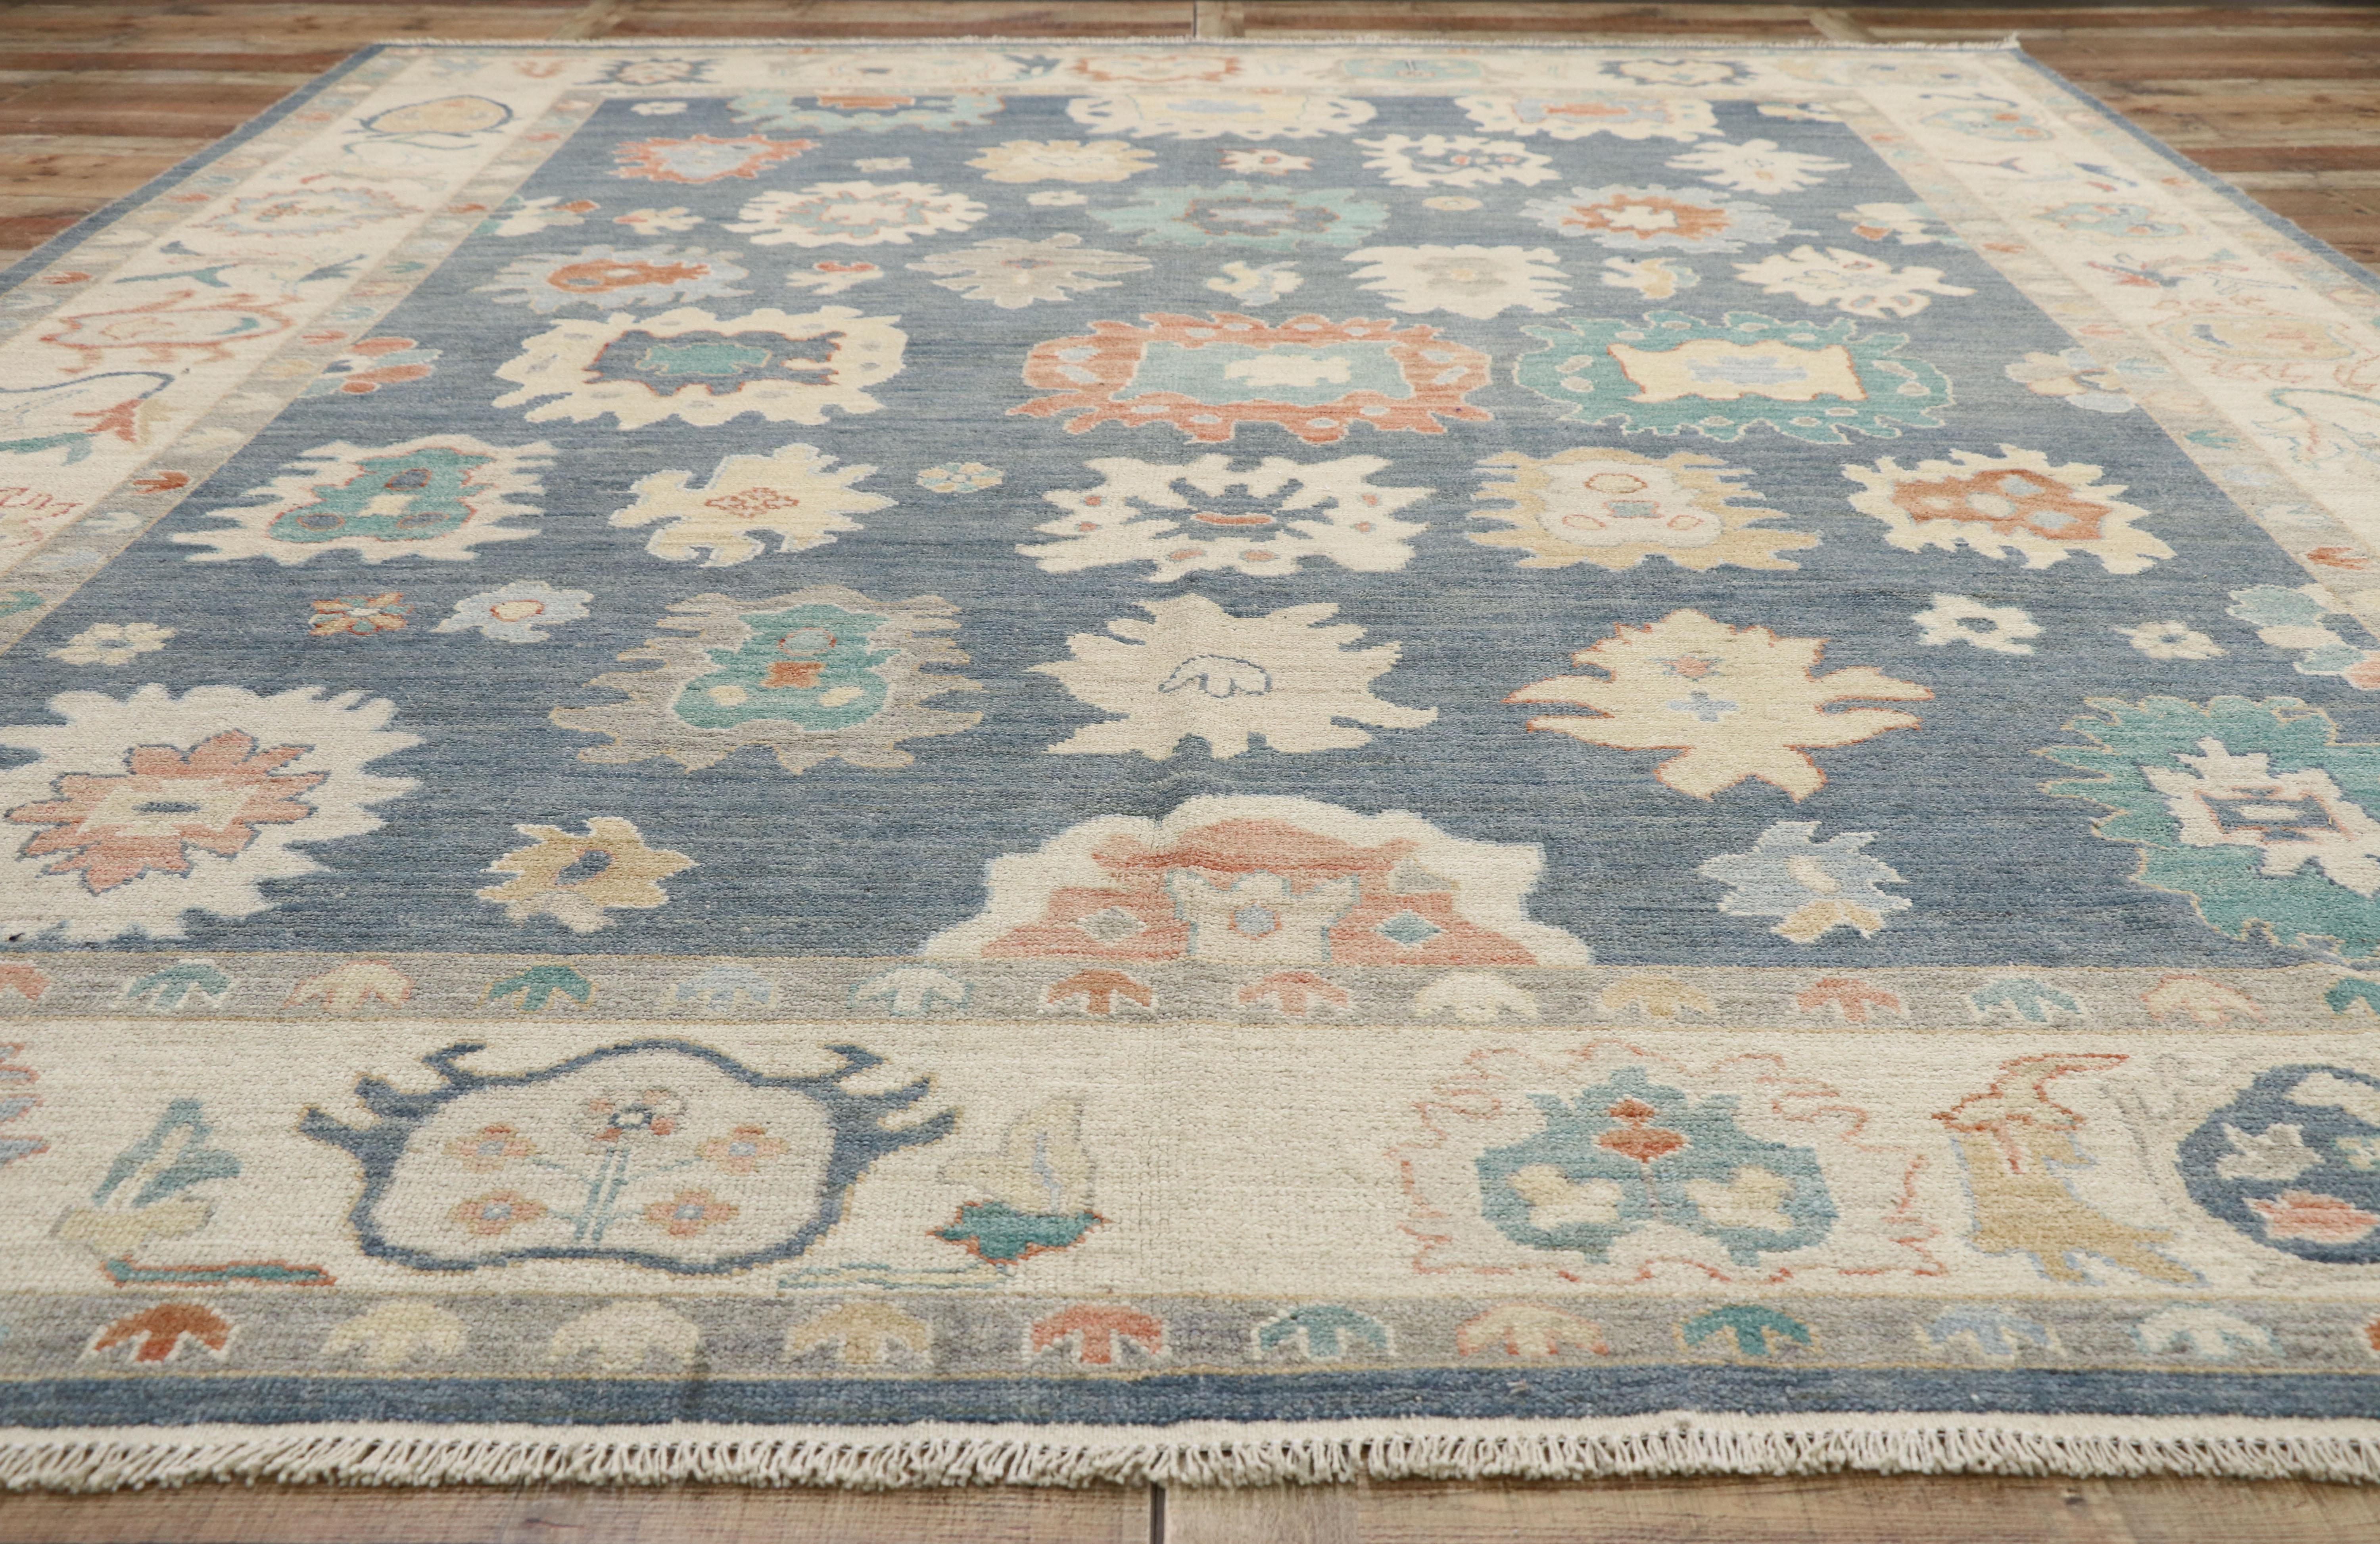 Turkish Contemporary Oushak Area Rug with Pastel Colors and French Transitional Style